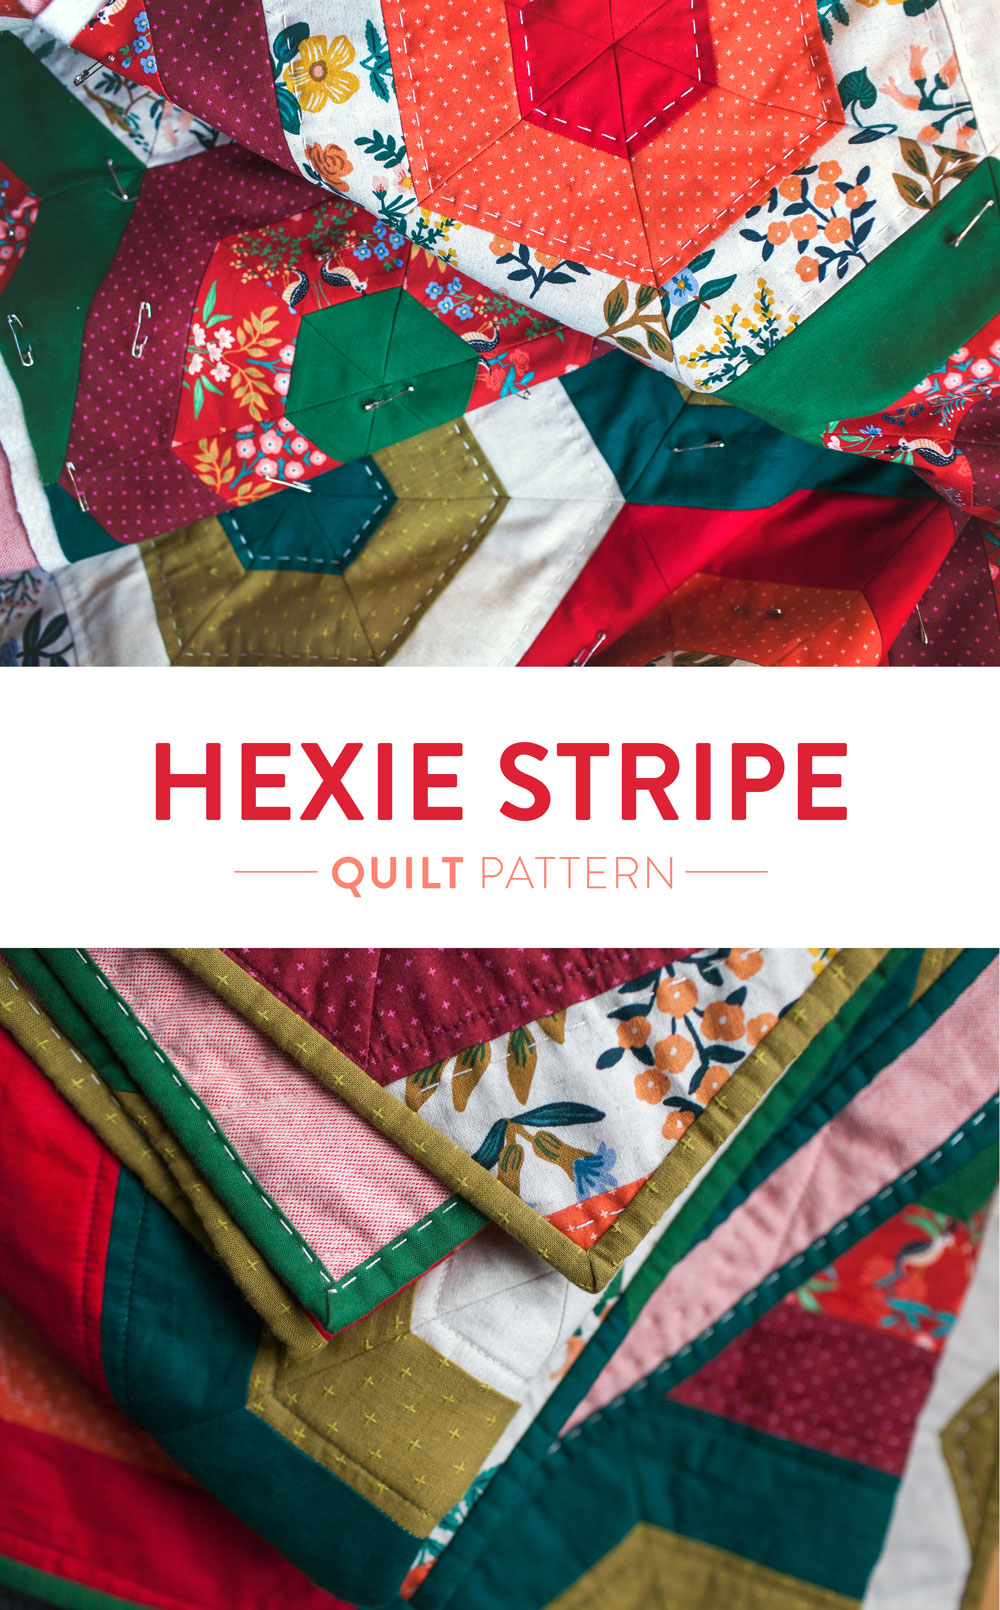 It's easy to get in the holiday spirit and get your Christmas quilting done with a pattern like Hexie Stripe. It's a vintage design with a modern twist! To make a throw all you need are 9 different 1/2 yd. cuts of fabric. Mix red and green solids with some floral prints for a beautifully festive quilt! suzyquilts.com #christmasquilt #diychristmas